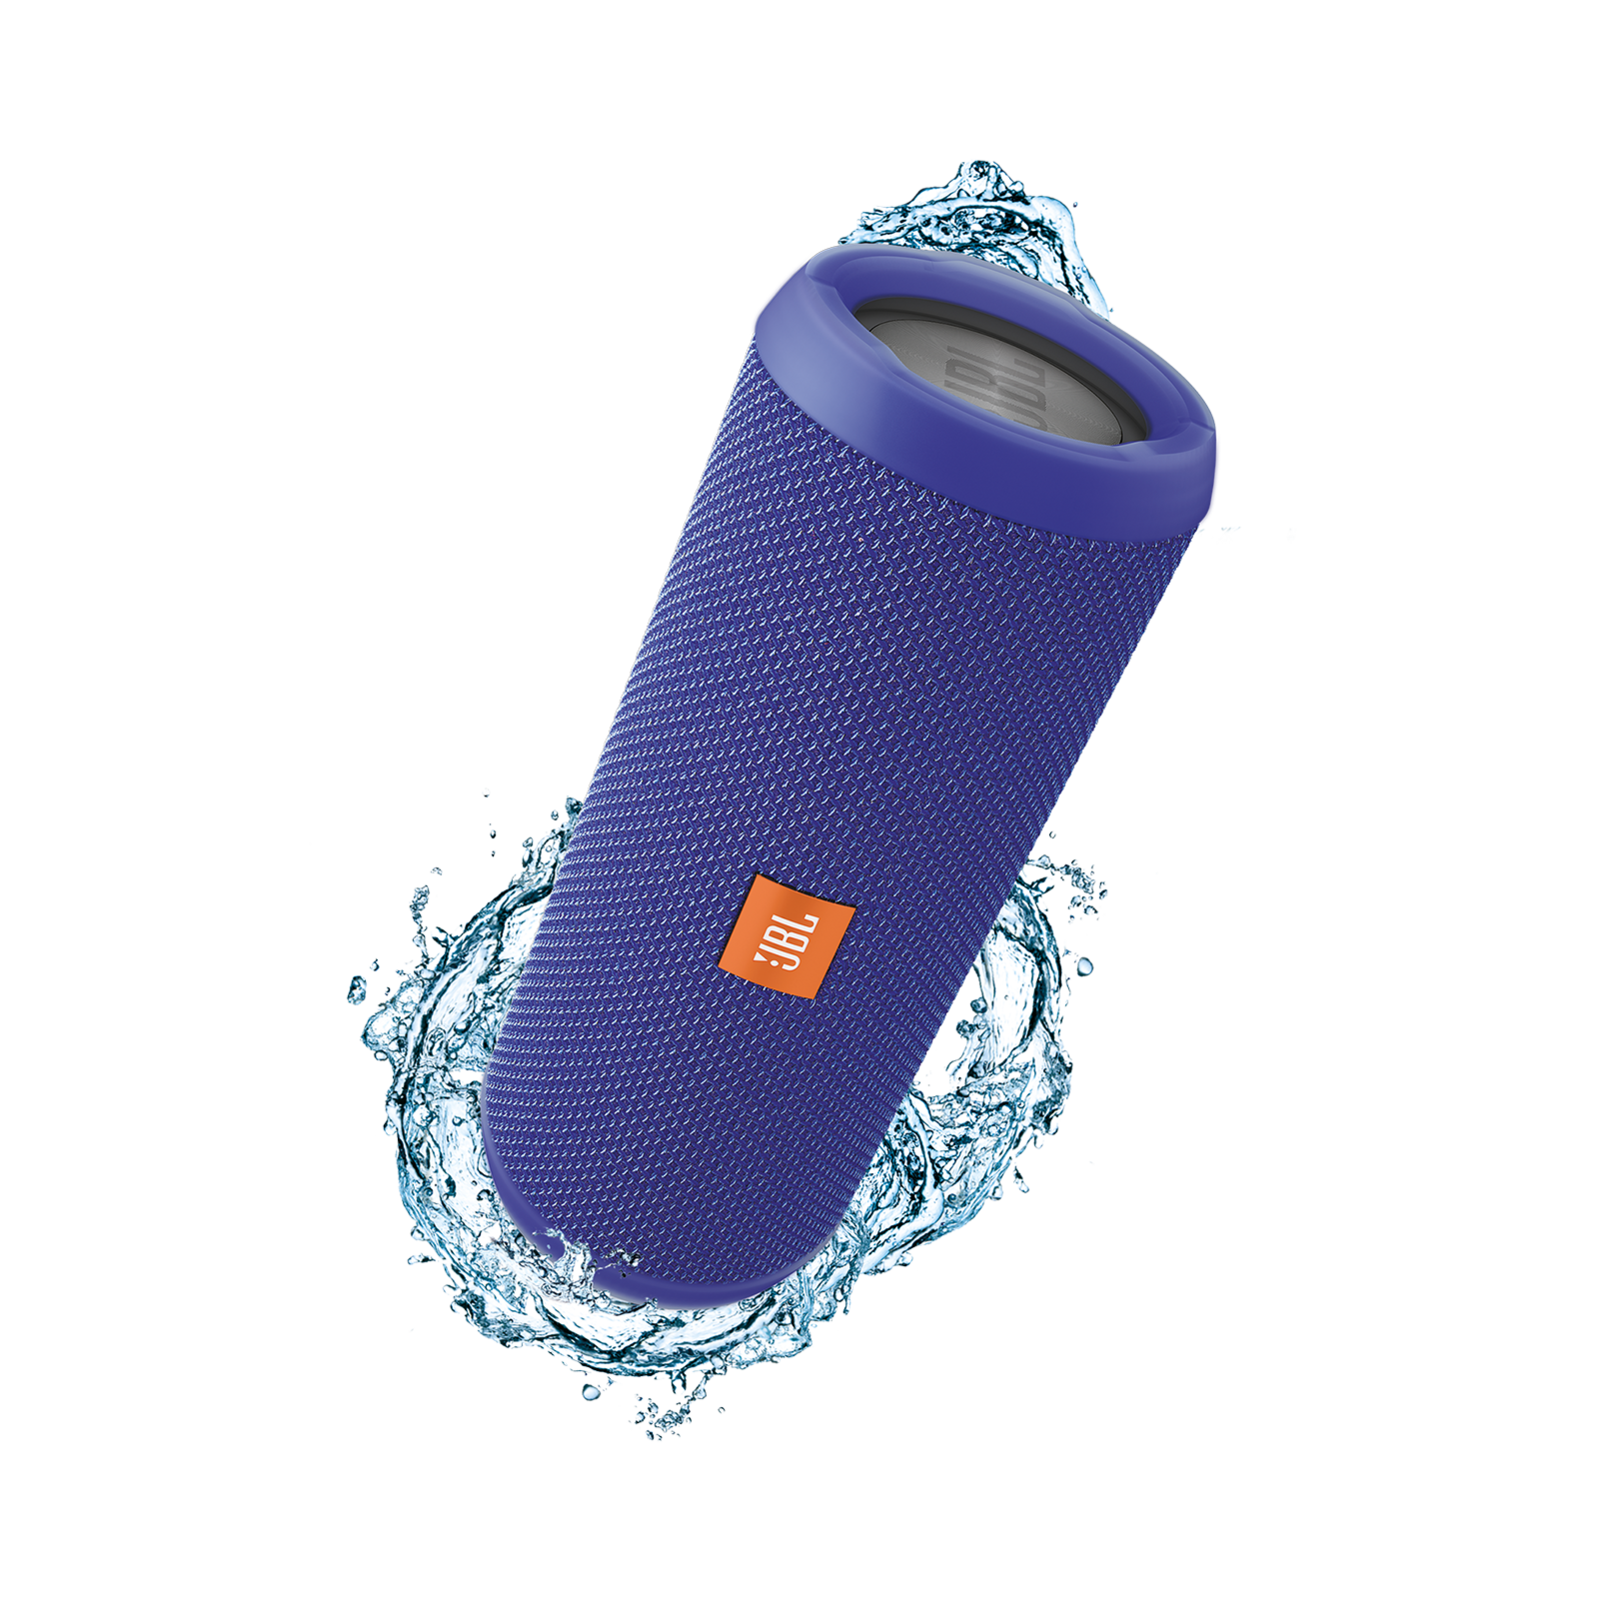 Save $60 on Flip 3 Refurbished. Full-Featured Splashproof Portable Bluetooth® Speaker with Surprisingly Powerful Sound. Sal eprice $39.95. Shop now.